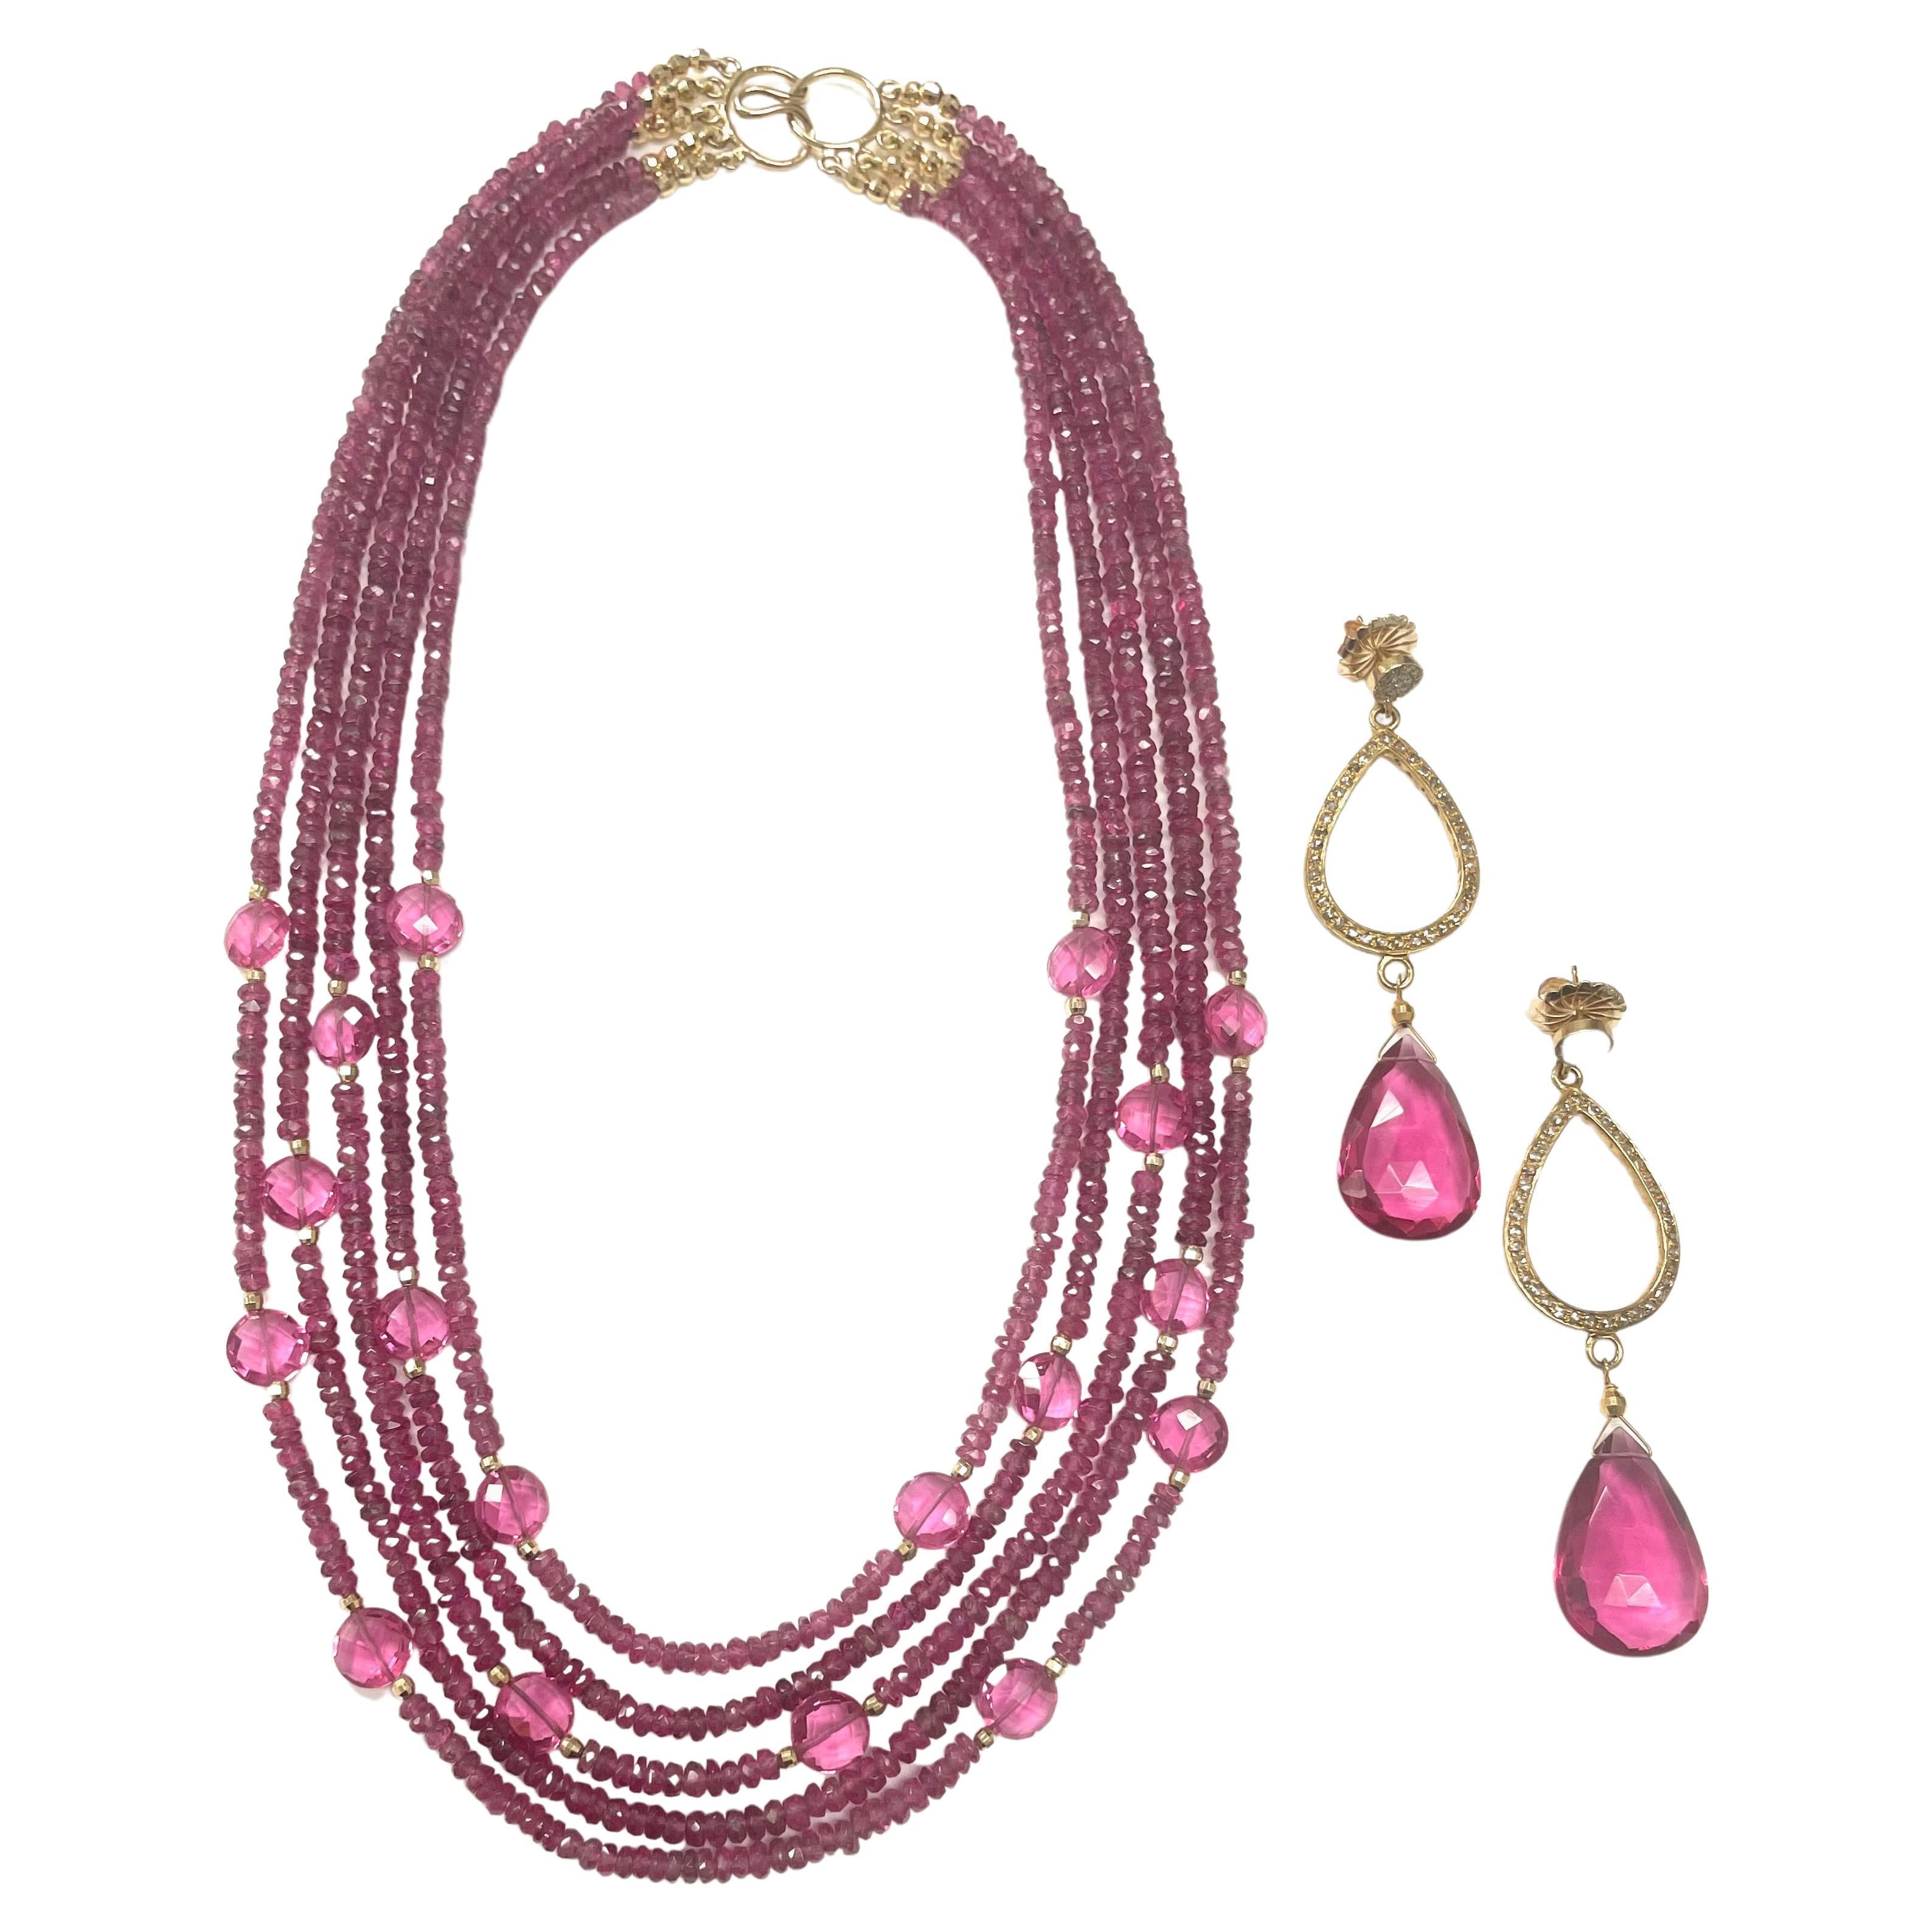 Description
5 Strand faceted pink Tourmaline rondelles, embellished with scattered coin shape hot pink Hydro Quartz and 14k yellow gold faceted balls. Item # N3709
Check out matching earrings (see photos), Item # E3313, $3,300.

Materials and